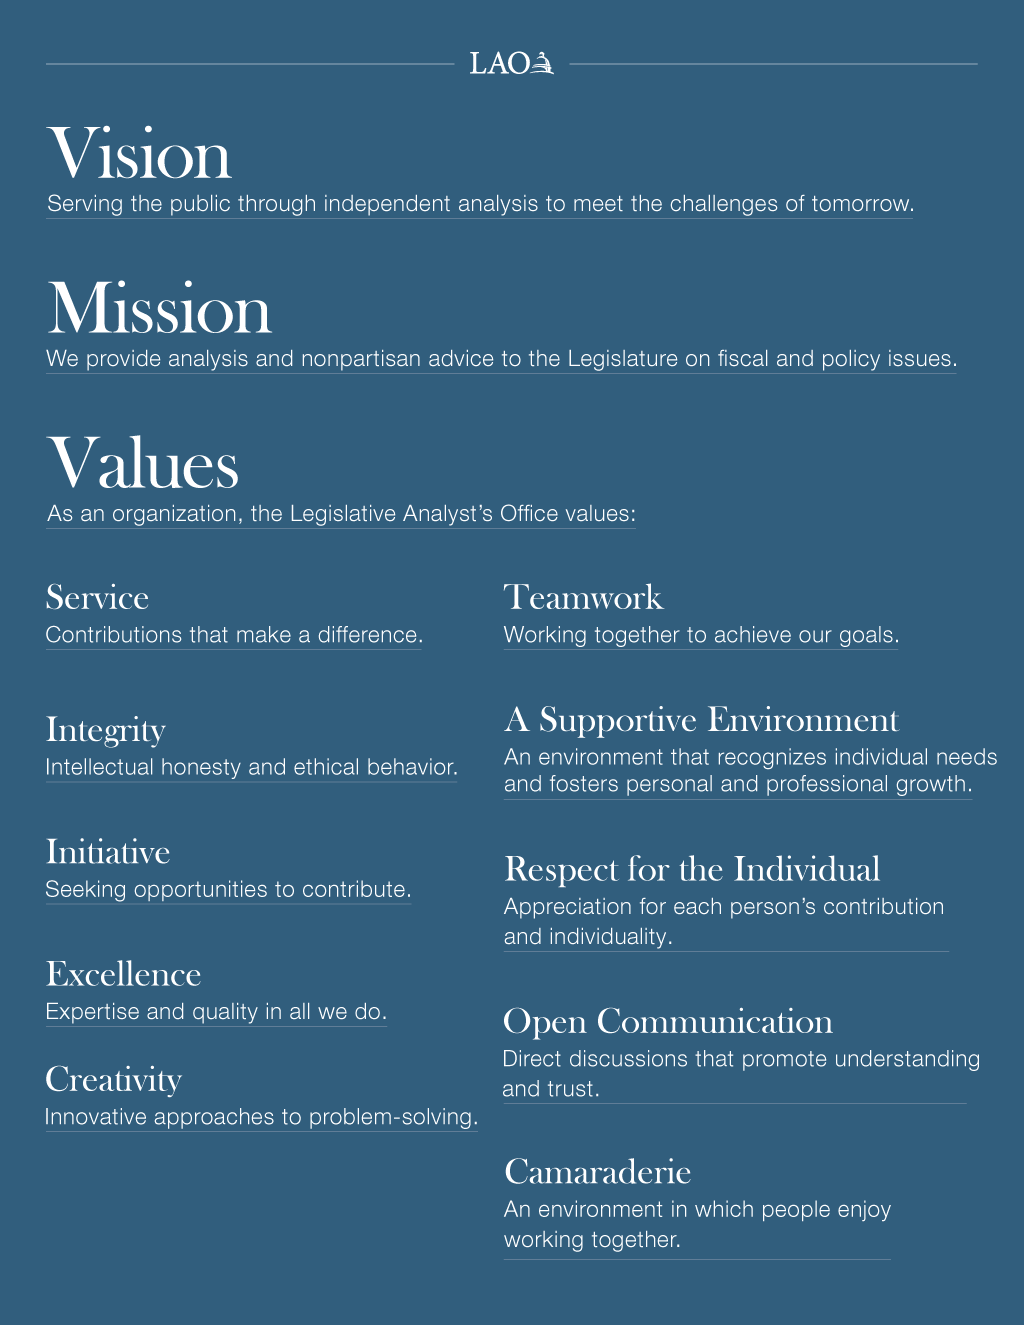 Vision, Mission, and Values statement.